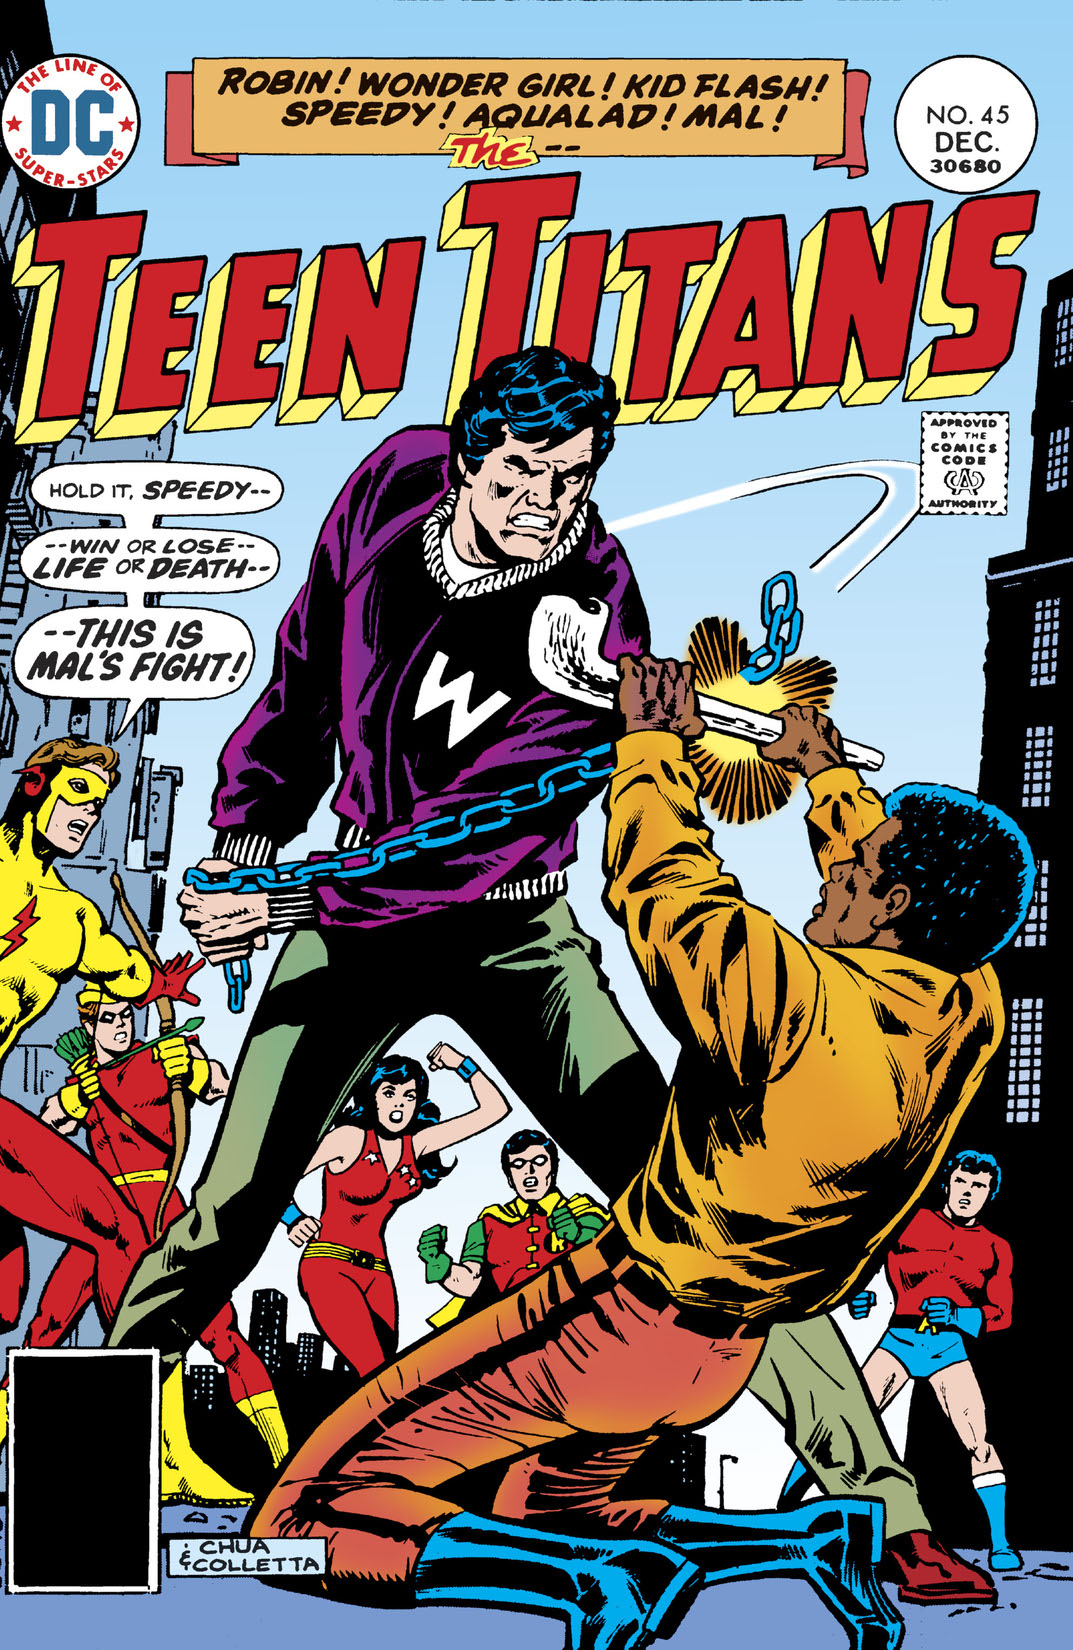 Teen Titans (1966-) #45 preview images